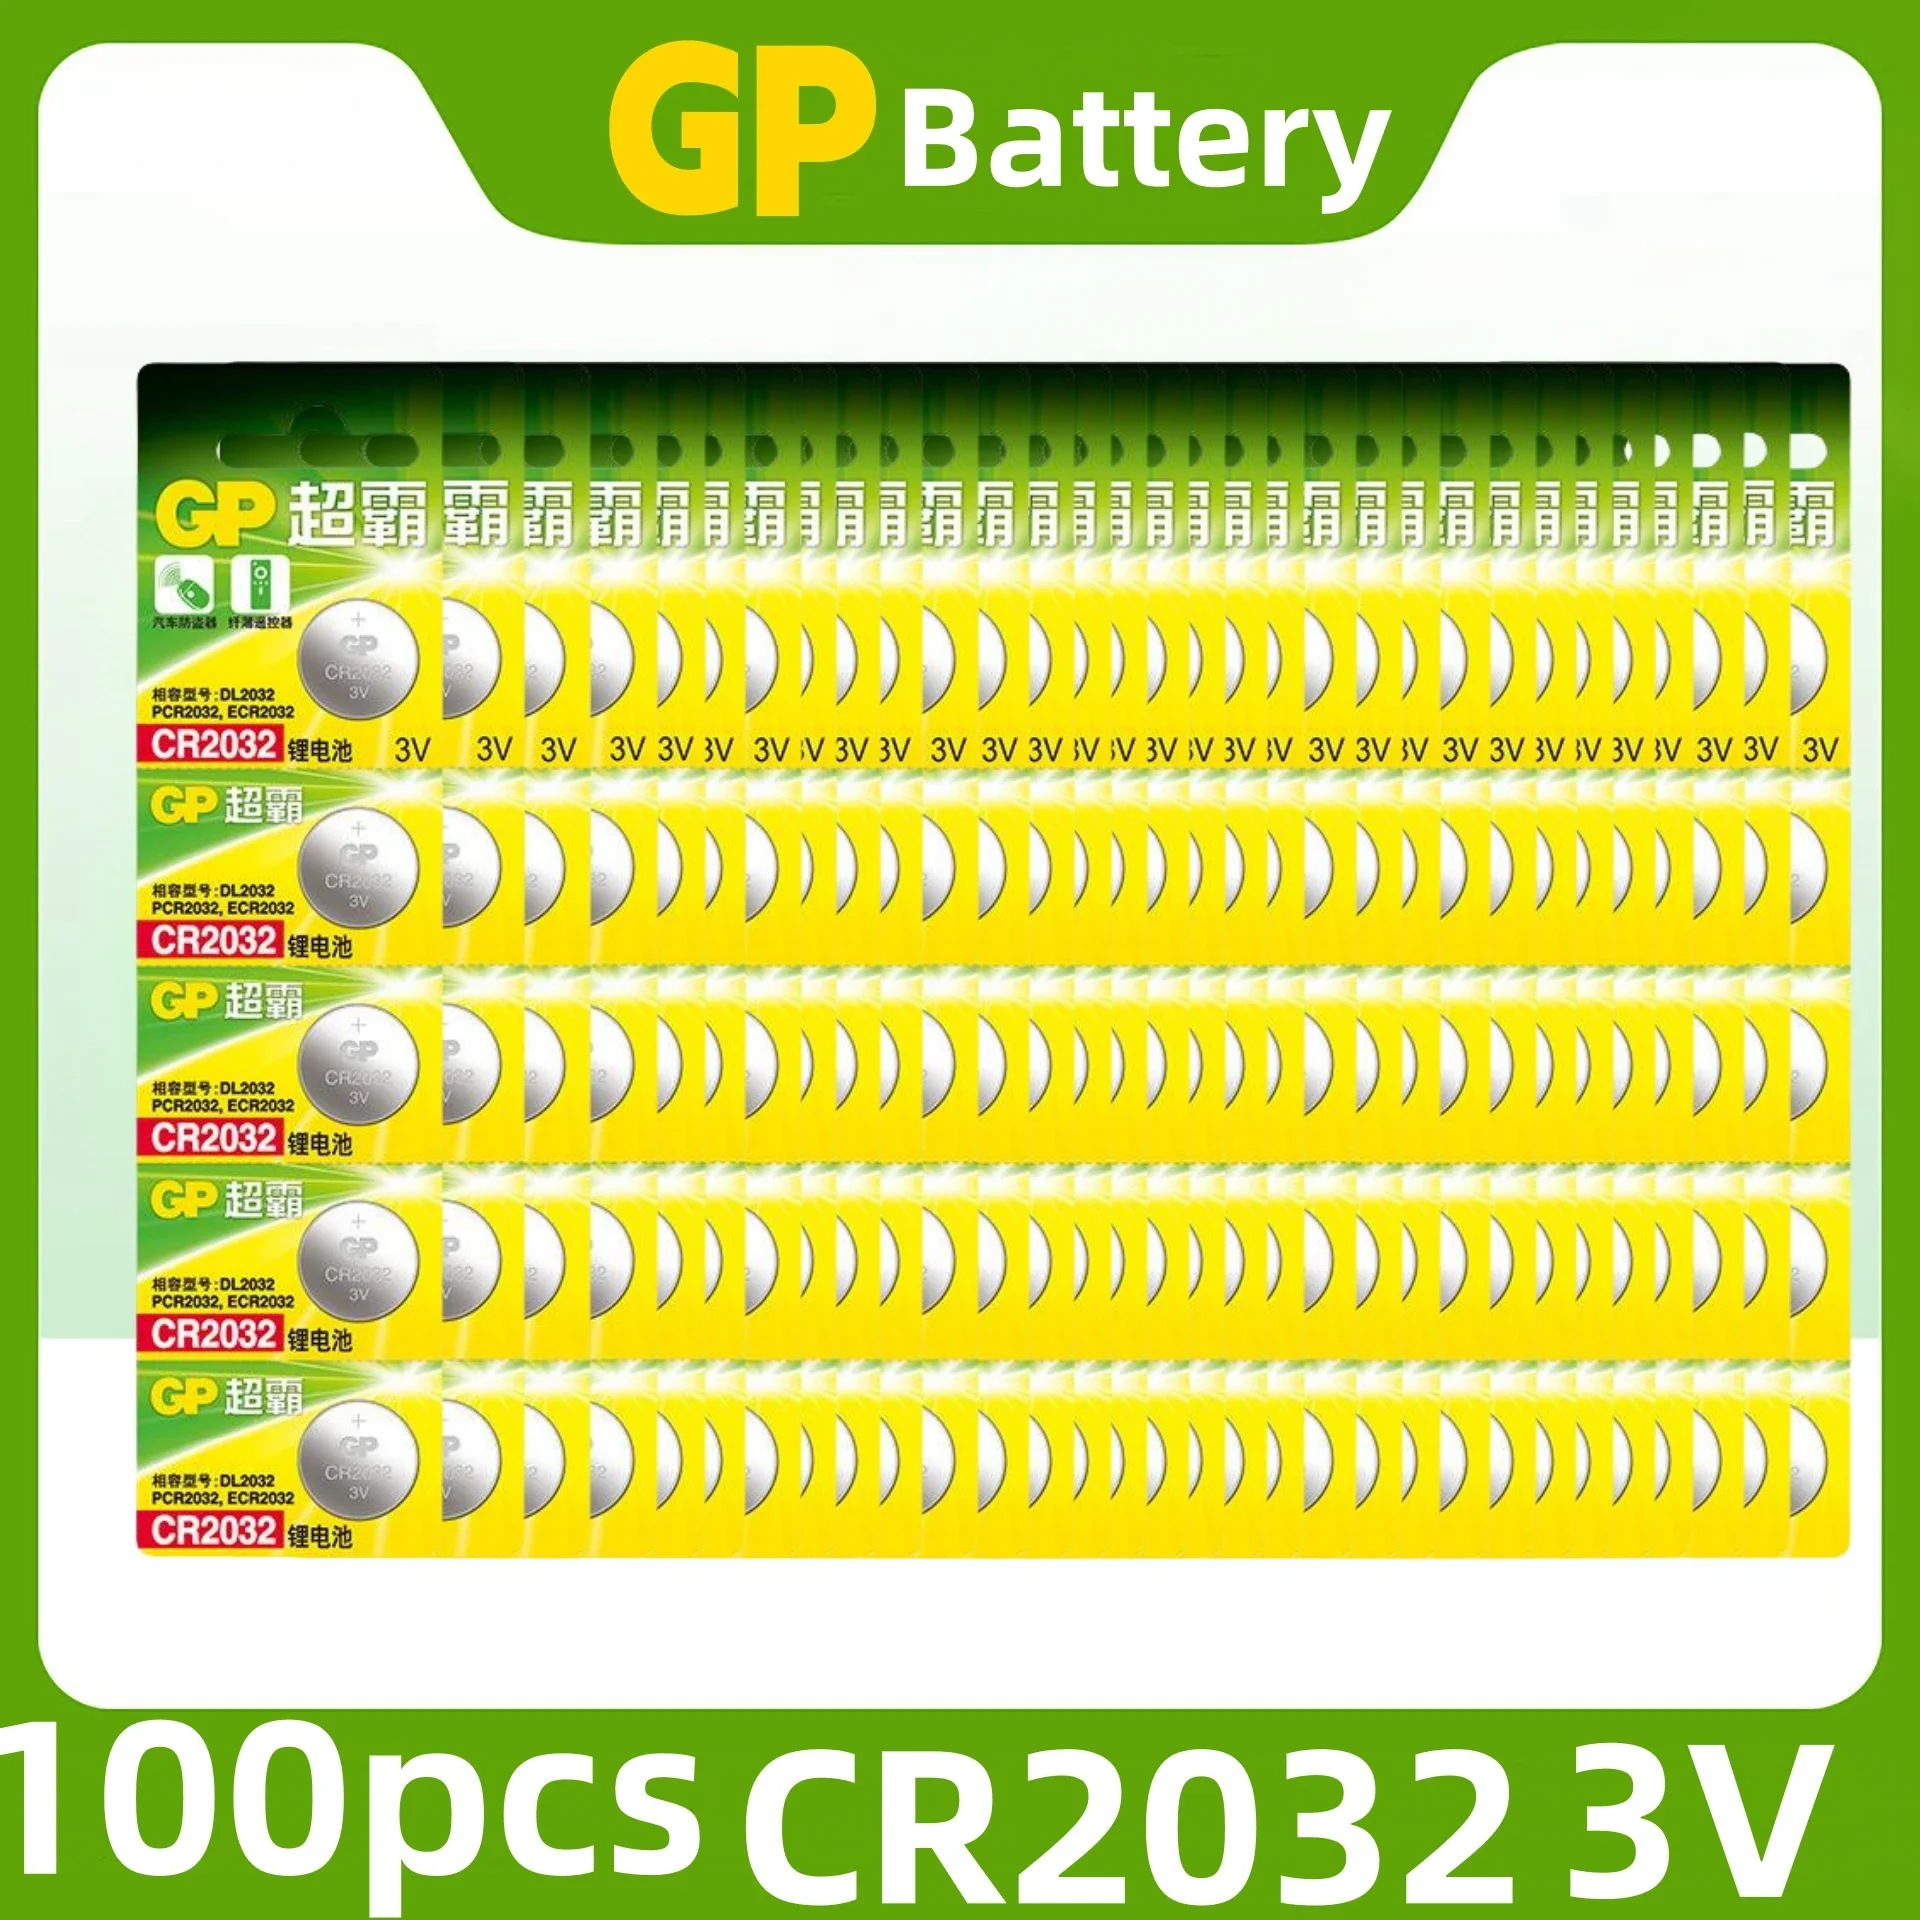 

GP 100PCS CR2032 3V Lithium Battery ECR2032 BR2032 DL2032 2032 Coin Cell Batteries for Car Remote Control Calculator pilas